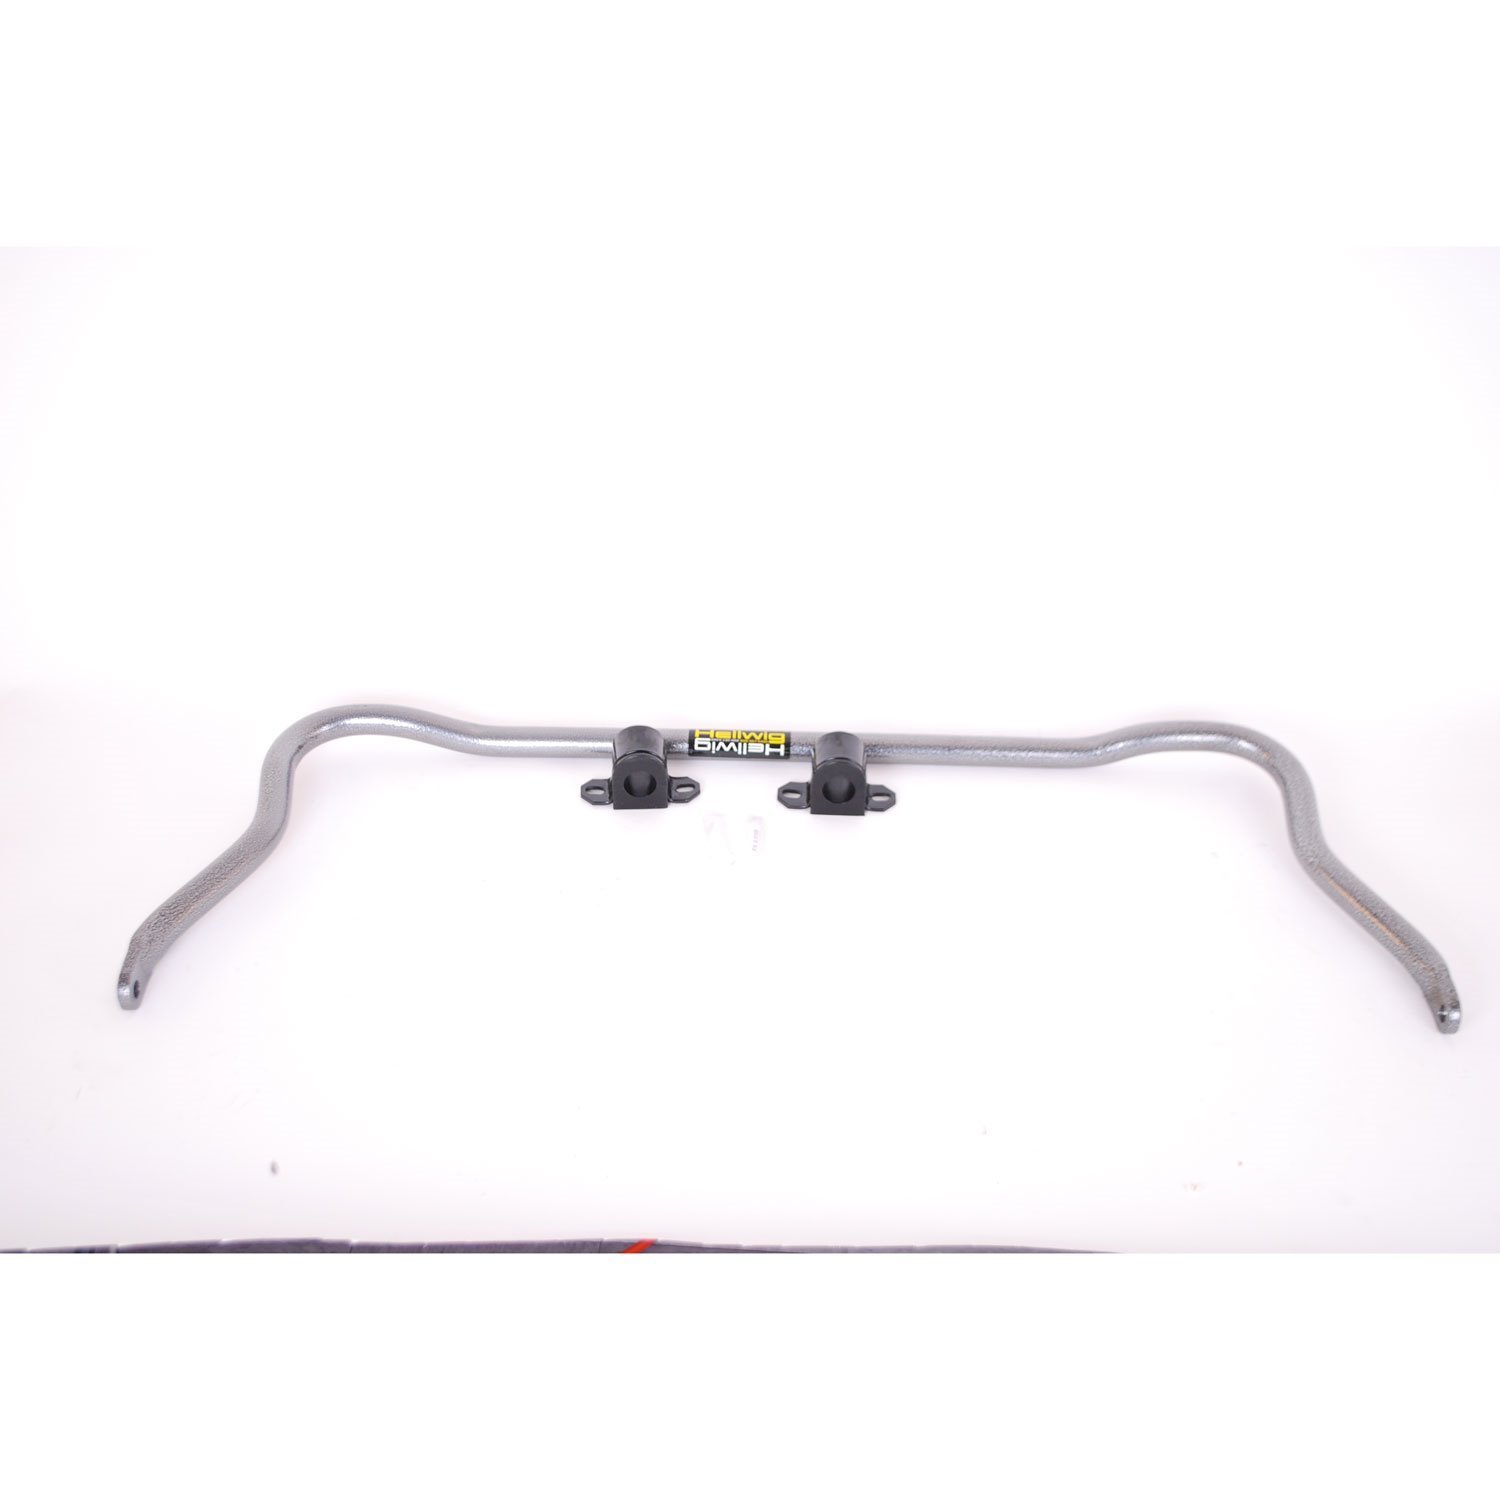 Front Sway Bar for 2008-2010 Ford F-250/F-350 Super